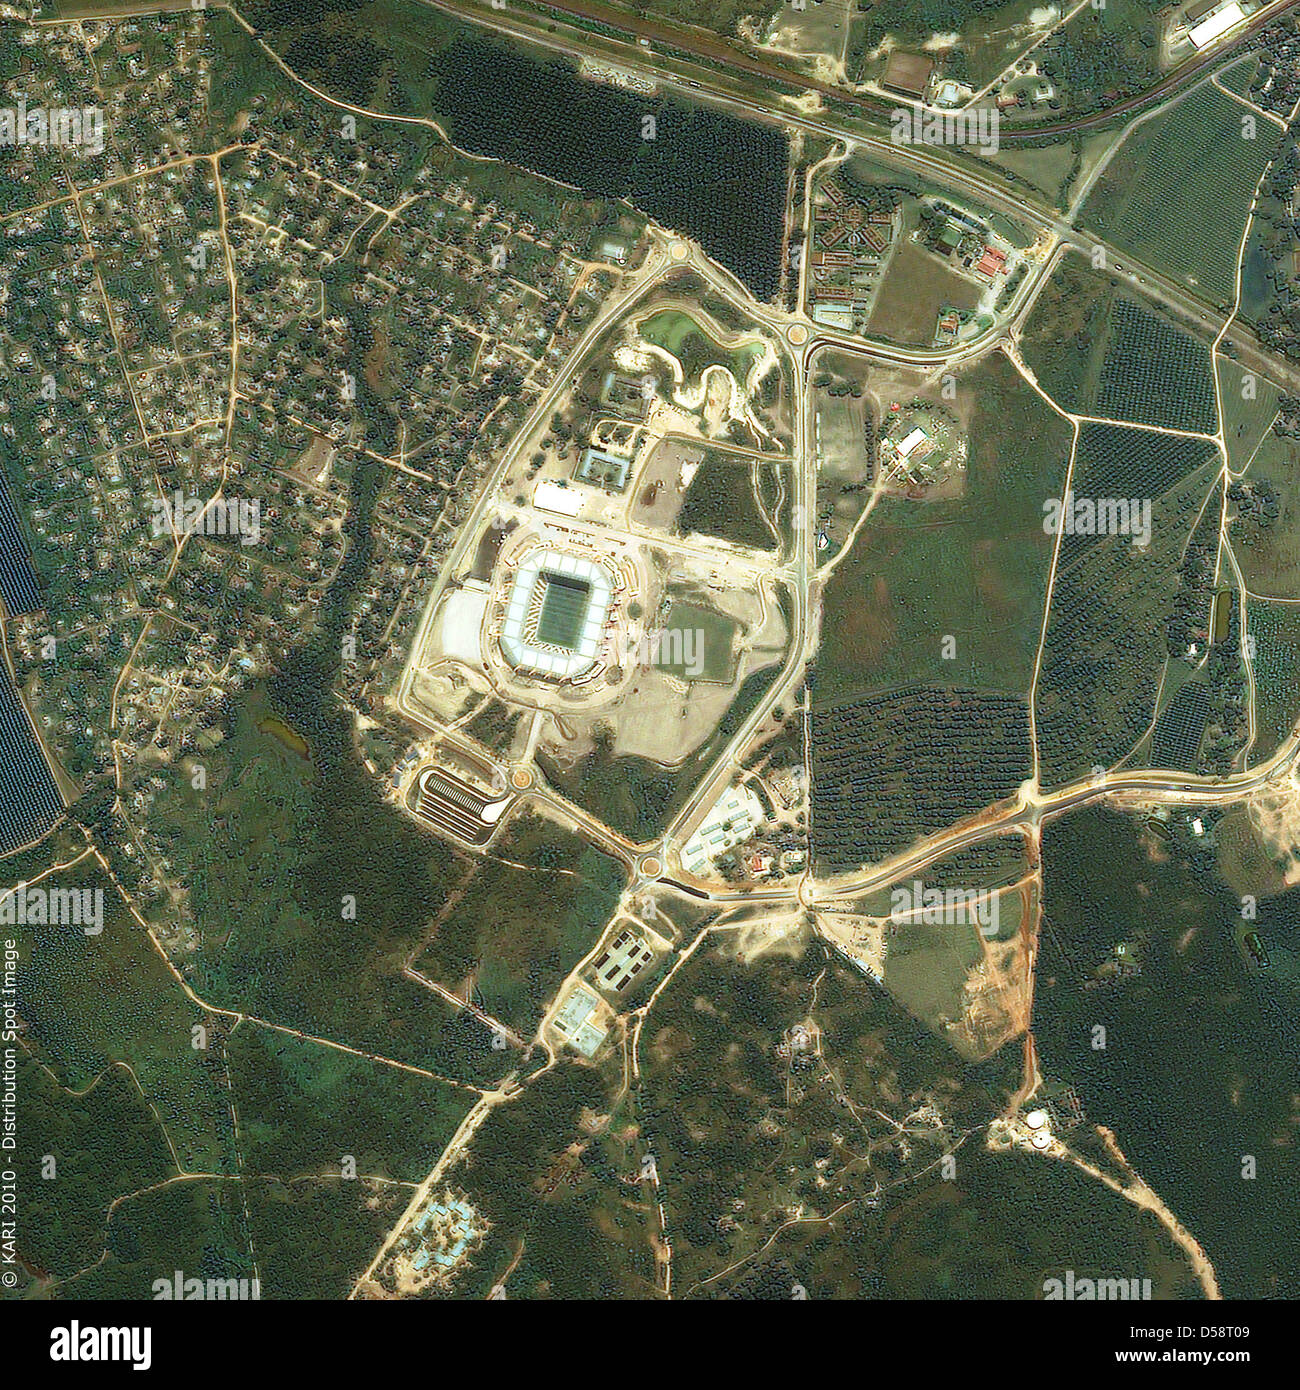 A satellite picture dated April 2010 made by Korean satellite Kompsat-2 built with significant involvement of space company EADS Astrium, from about 700 kilometres height, of the 2010 FIFA World Cup Mbombela Stadium in Nelspruit, South Africa. Newly built Mbombela Stadium will host four group stage matches. Photo: Kari/SpotImage/Astrium (ATTENTION: USAGE ONLY WITH REFERENCE TO INIT Stock Photo